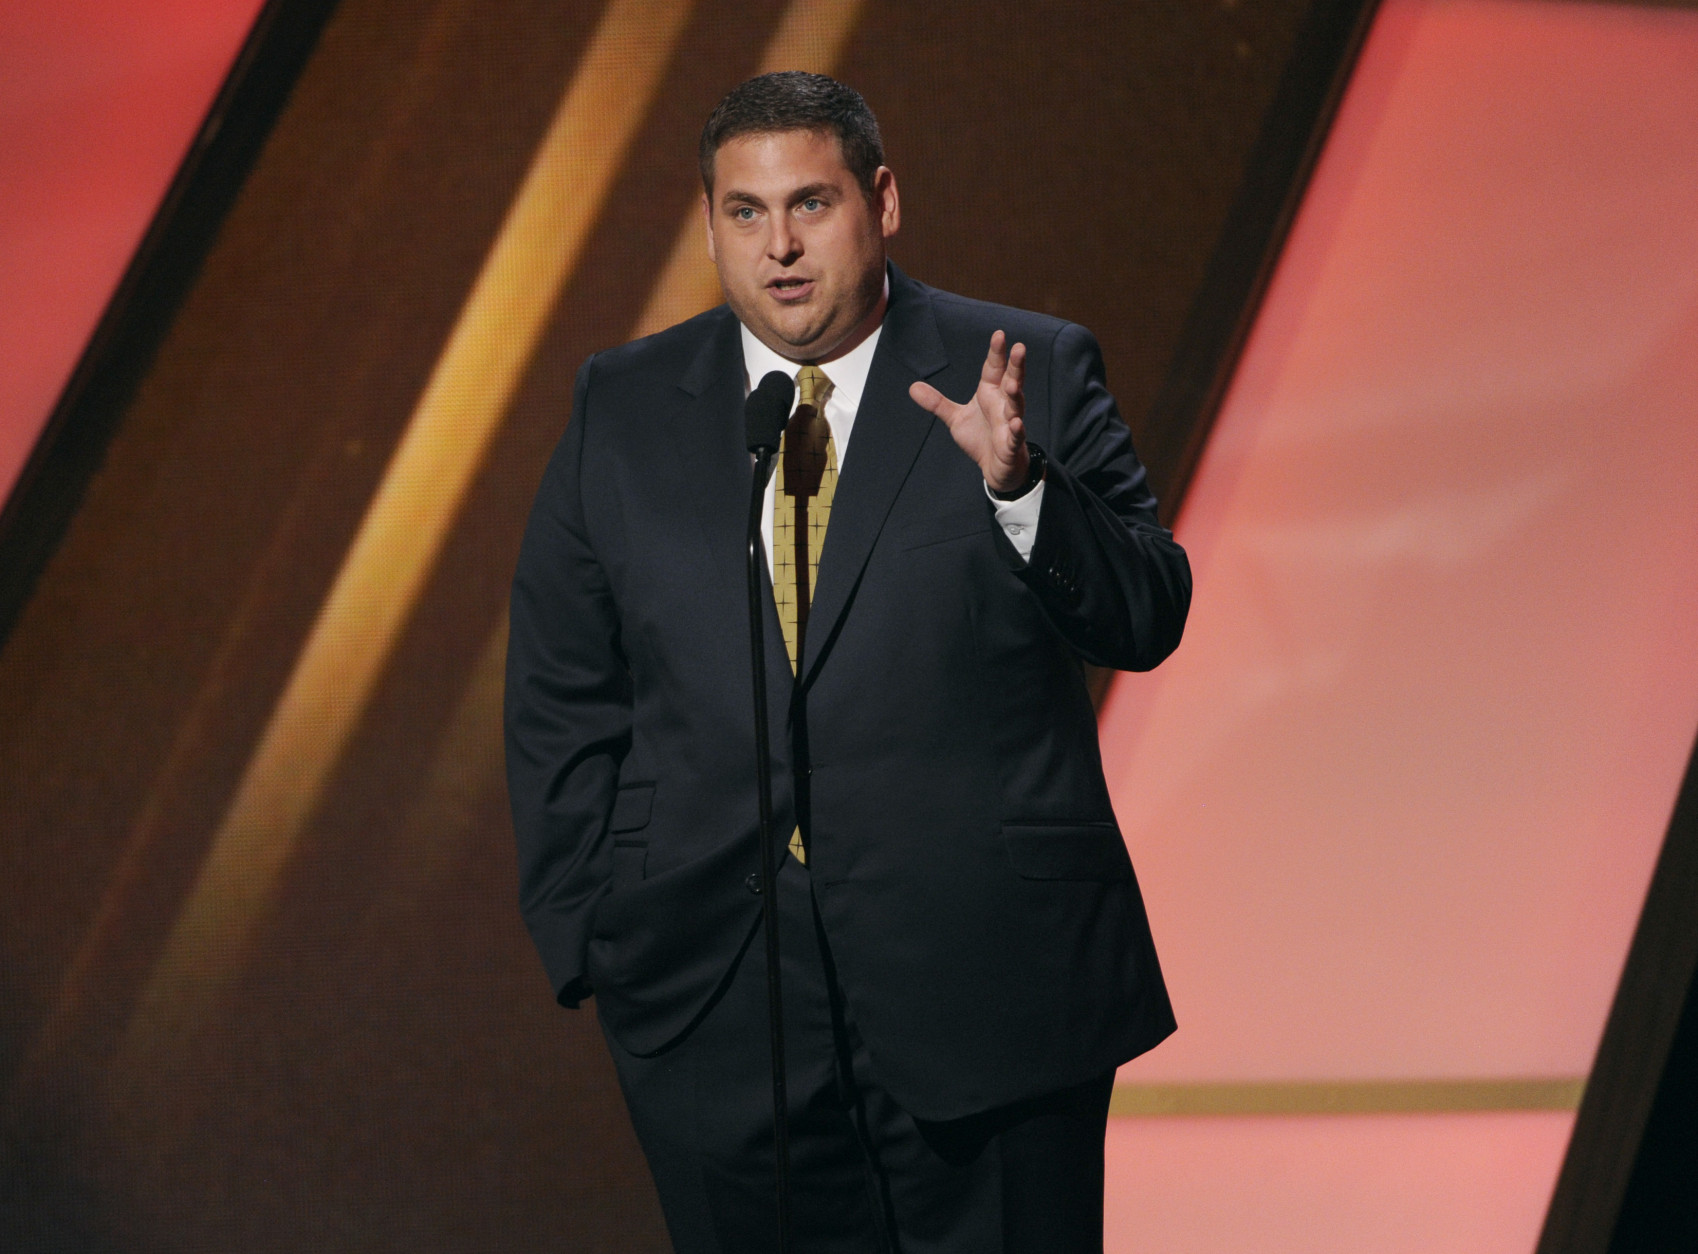 Jonah Hill presents the Hollywood ensemble award on stage at the Hollywood Film Awards at the Palladium on Friday, Nov. 14, 2014, in Los Angeles. (Photo by Chris Pizzello/Invision/AP)